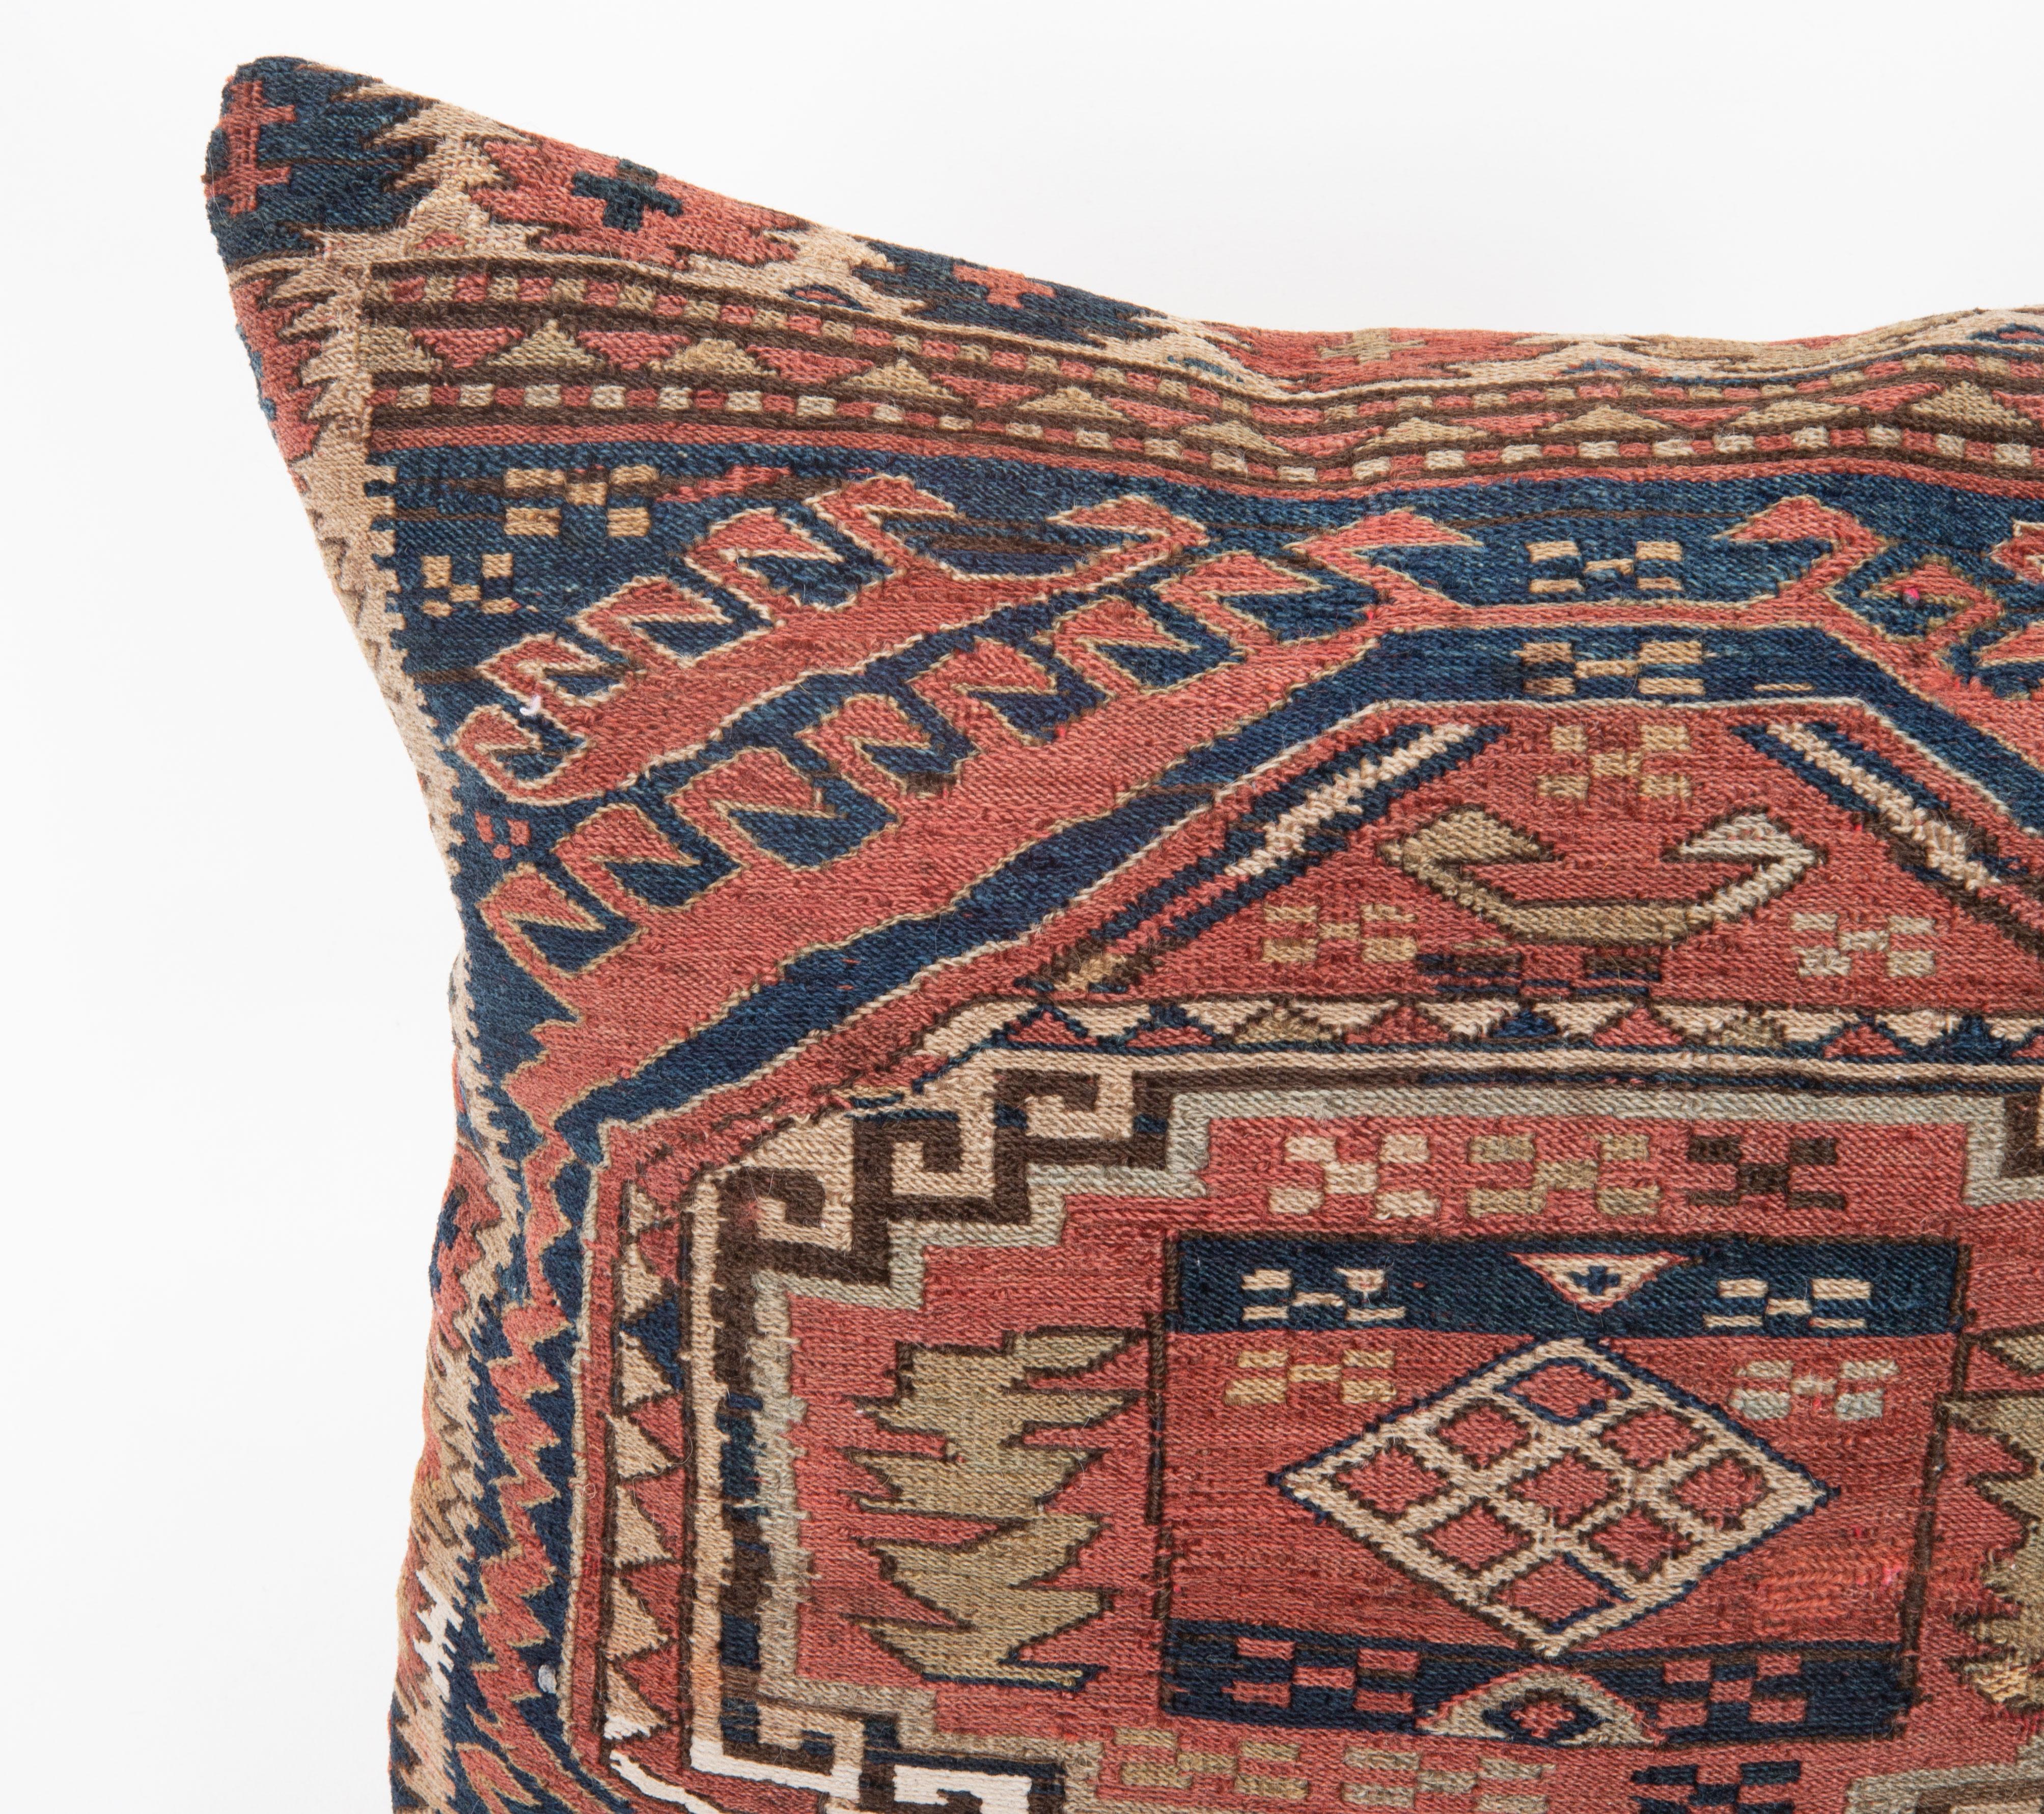 Azerbaijani Pillow Cover Fashioned from an Antique Caucasian Sumak Bag Face For Sale